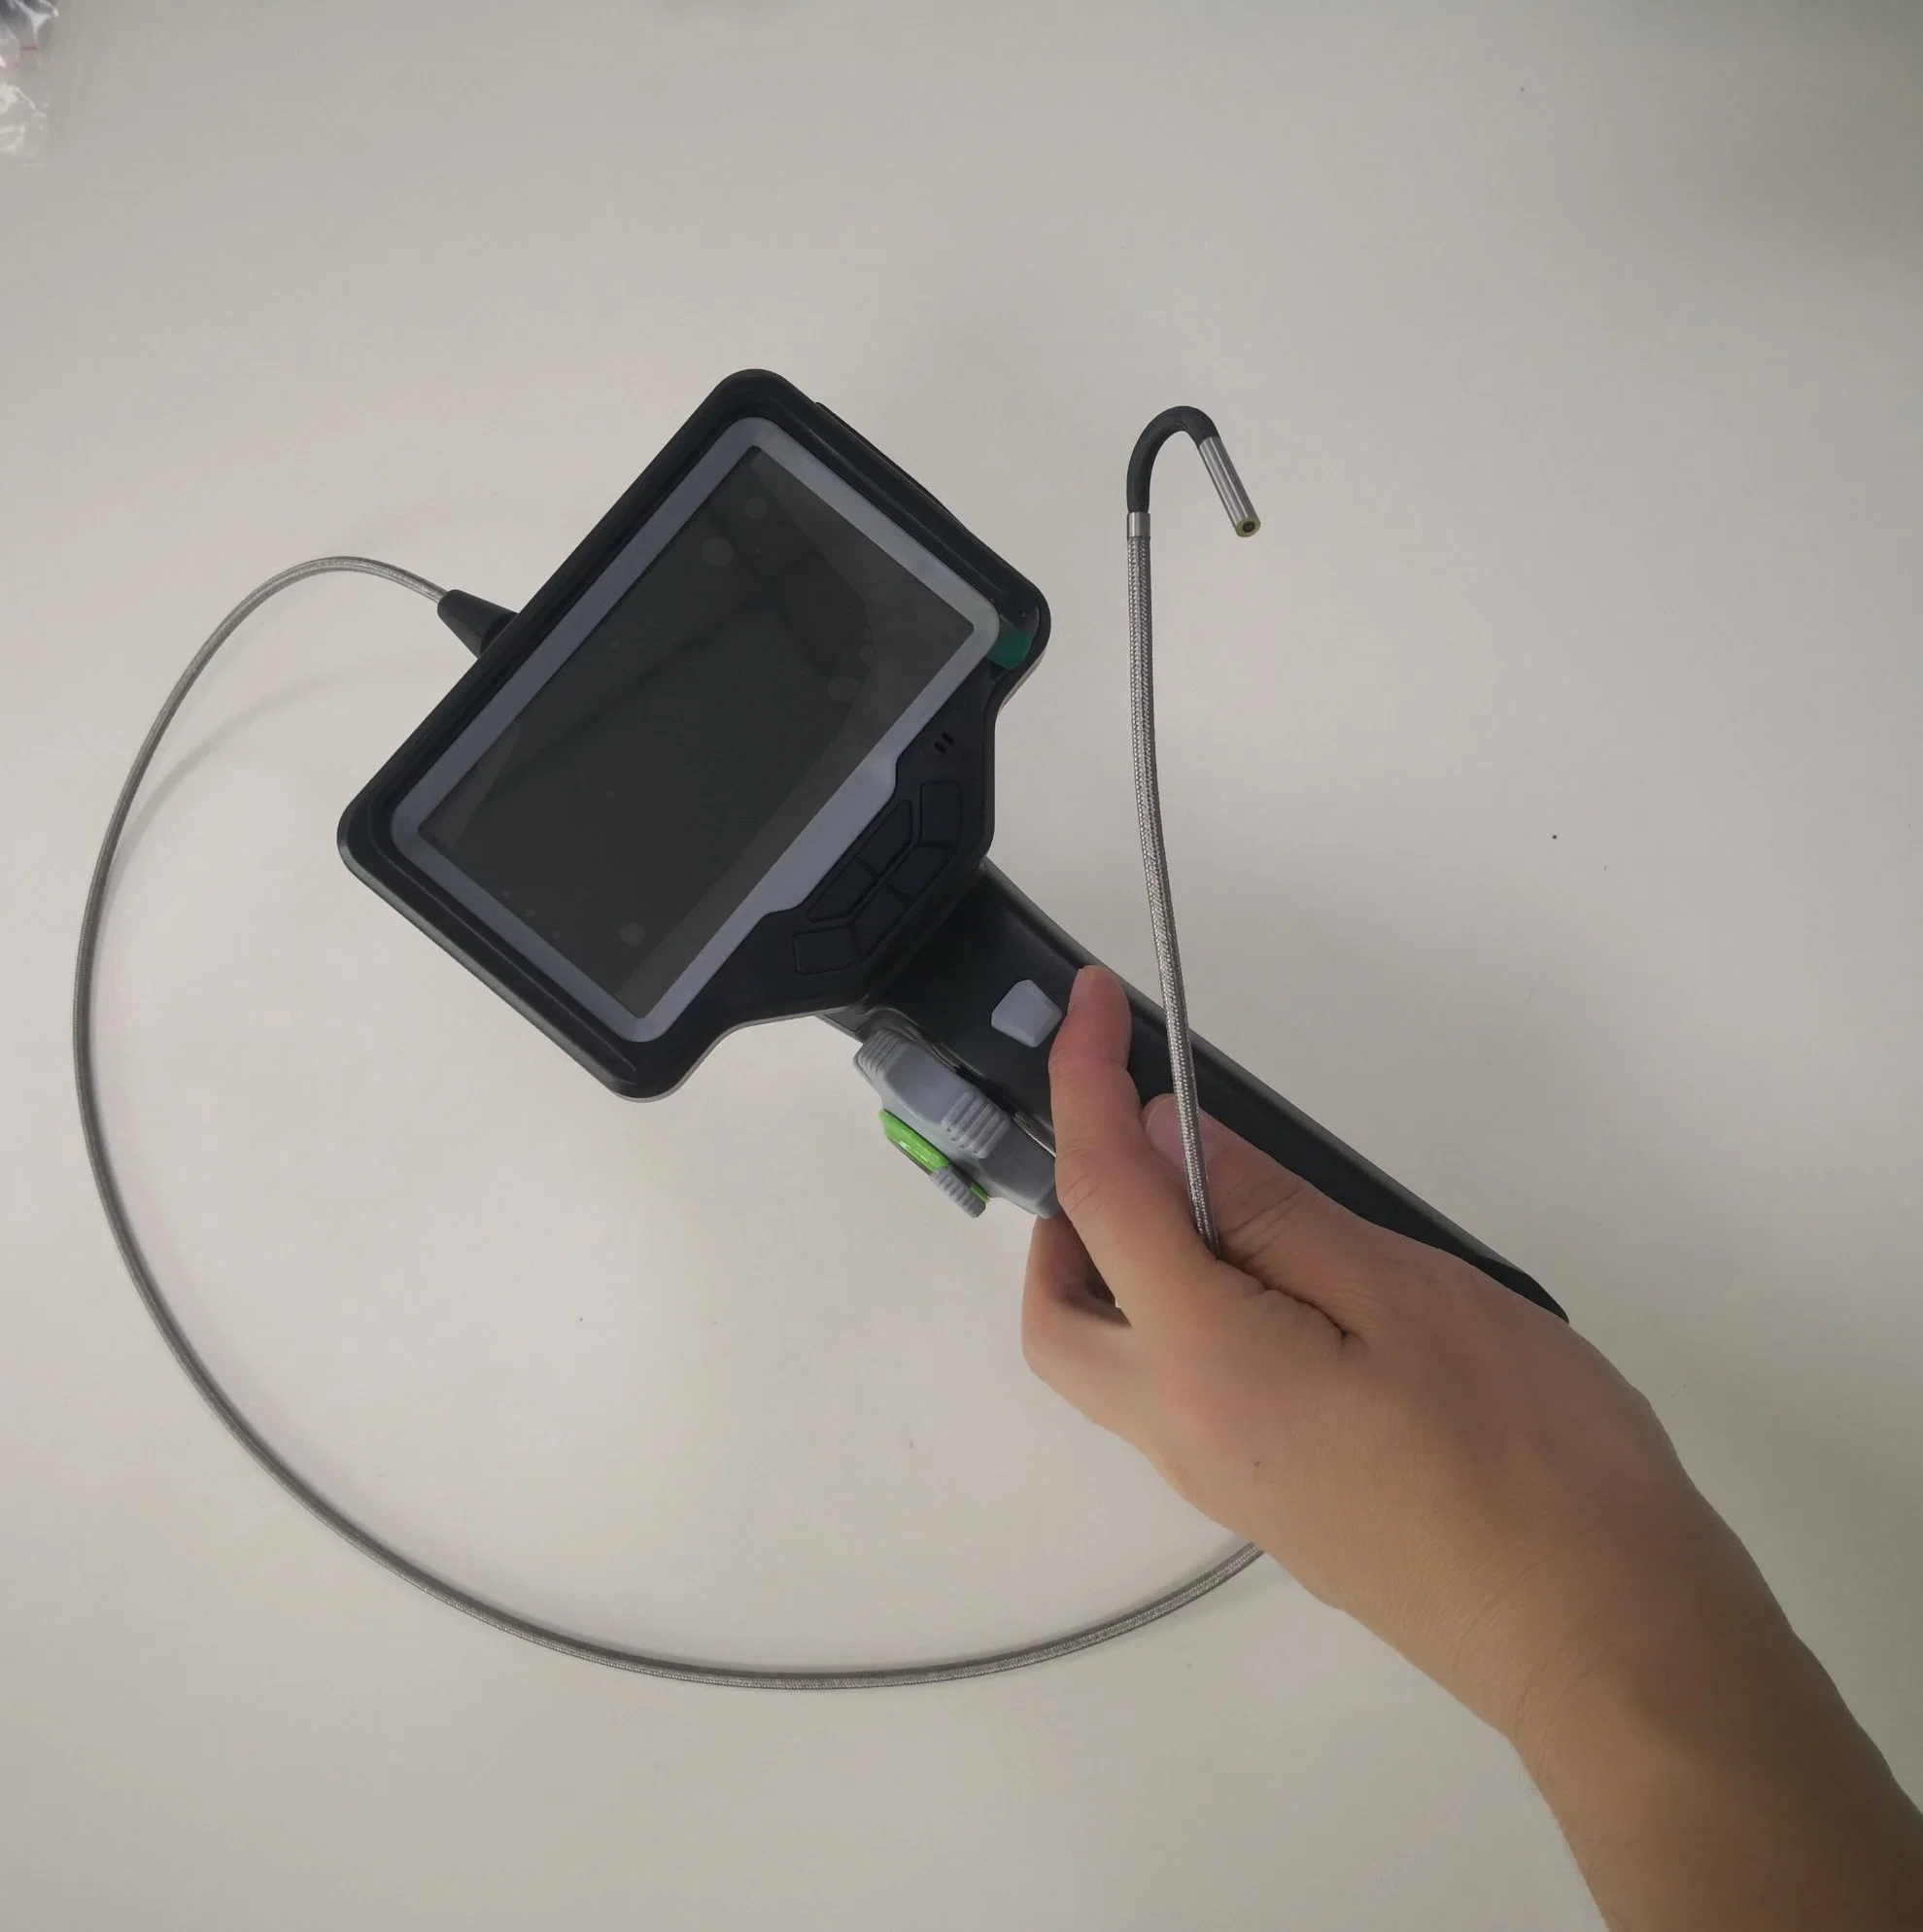 Flexible Videoscope Inspection Camera with 3.9mm Camera Lens, 1.5 Meter Working Cable Length, Two-Way Tip Articulations.